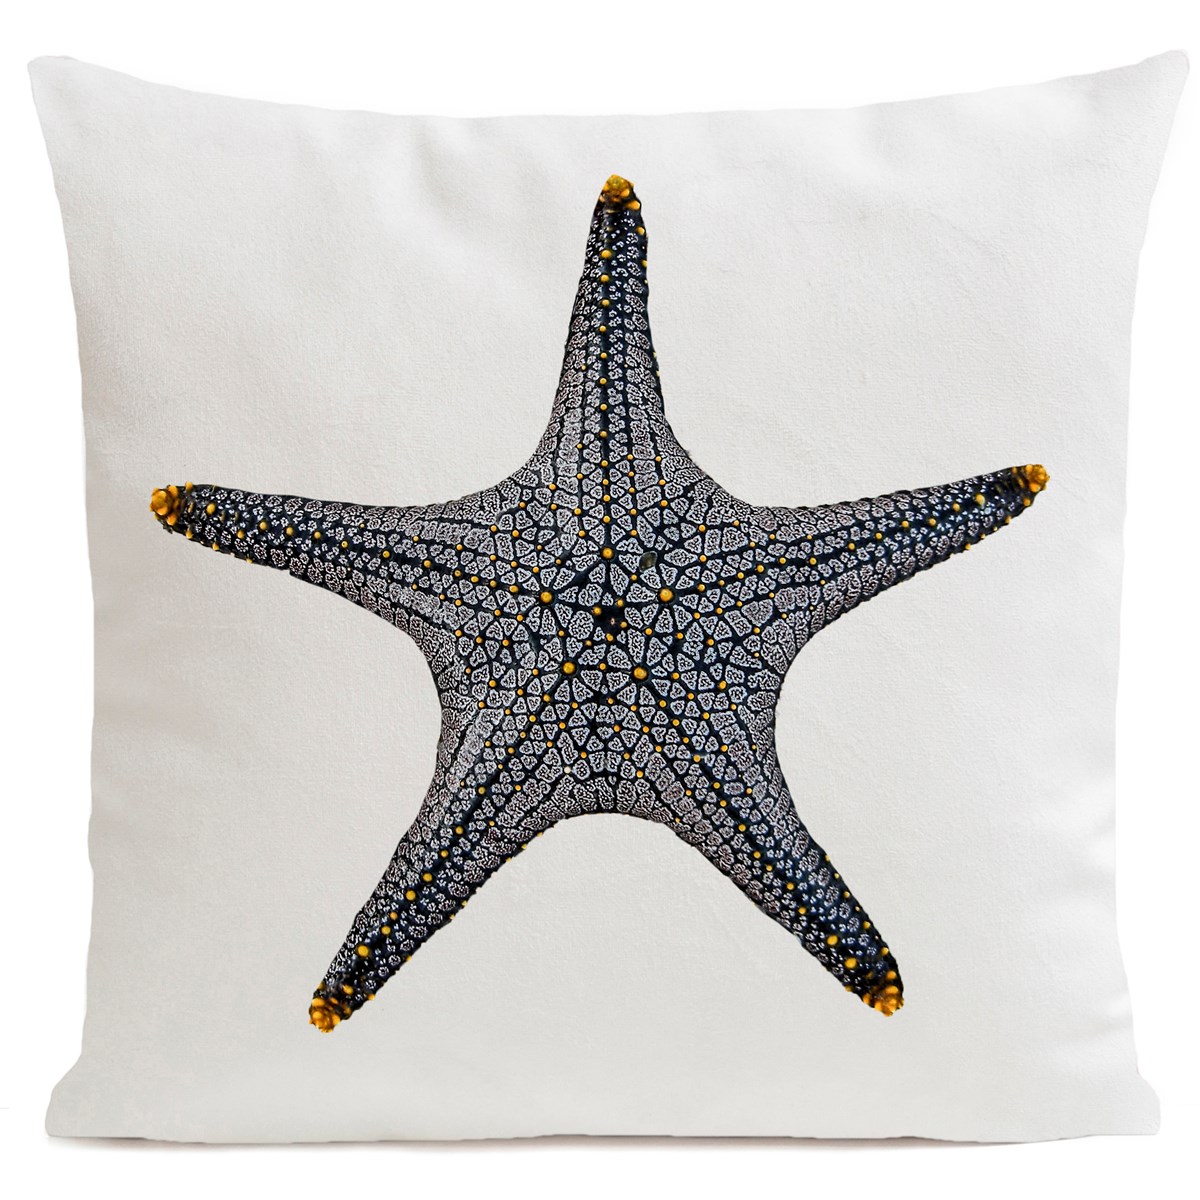 Coussin Star Fish